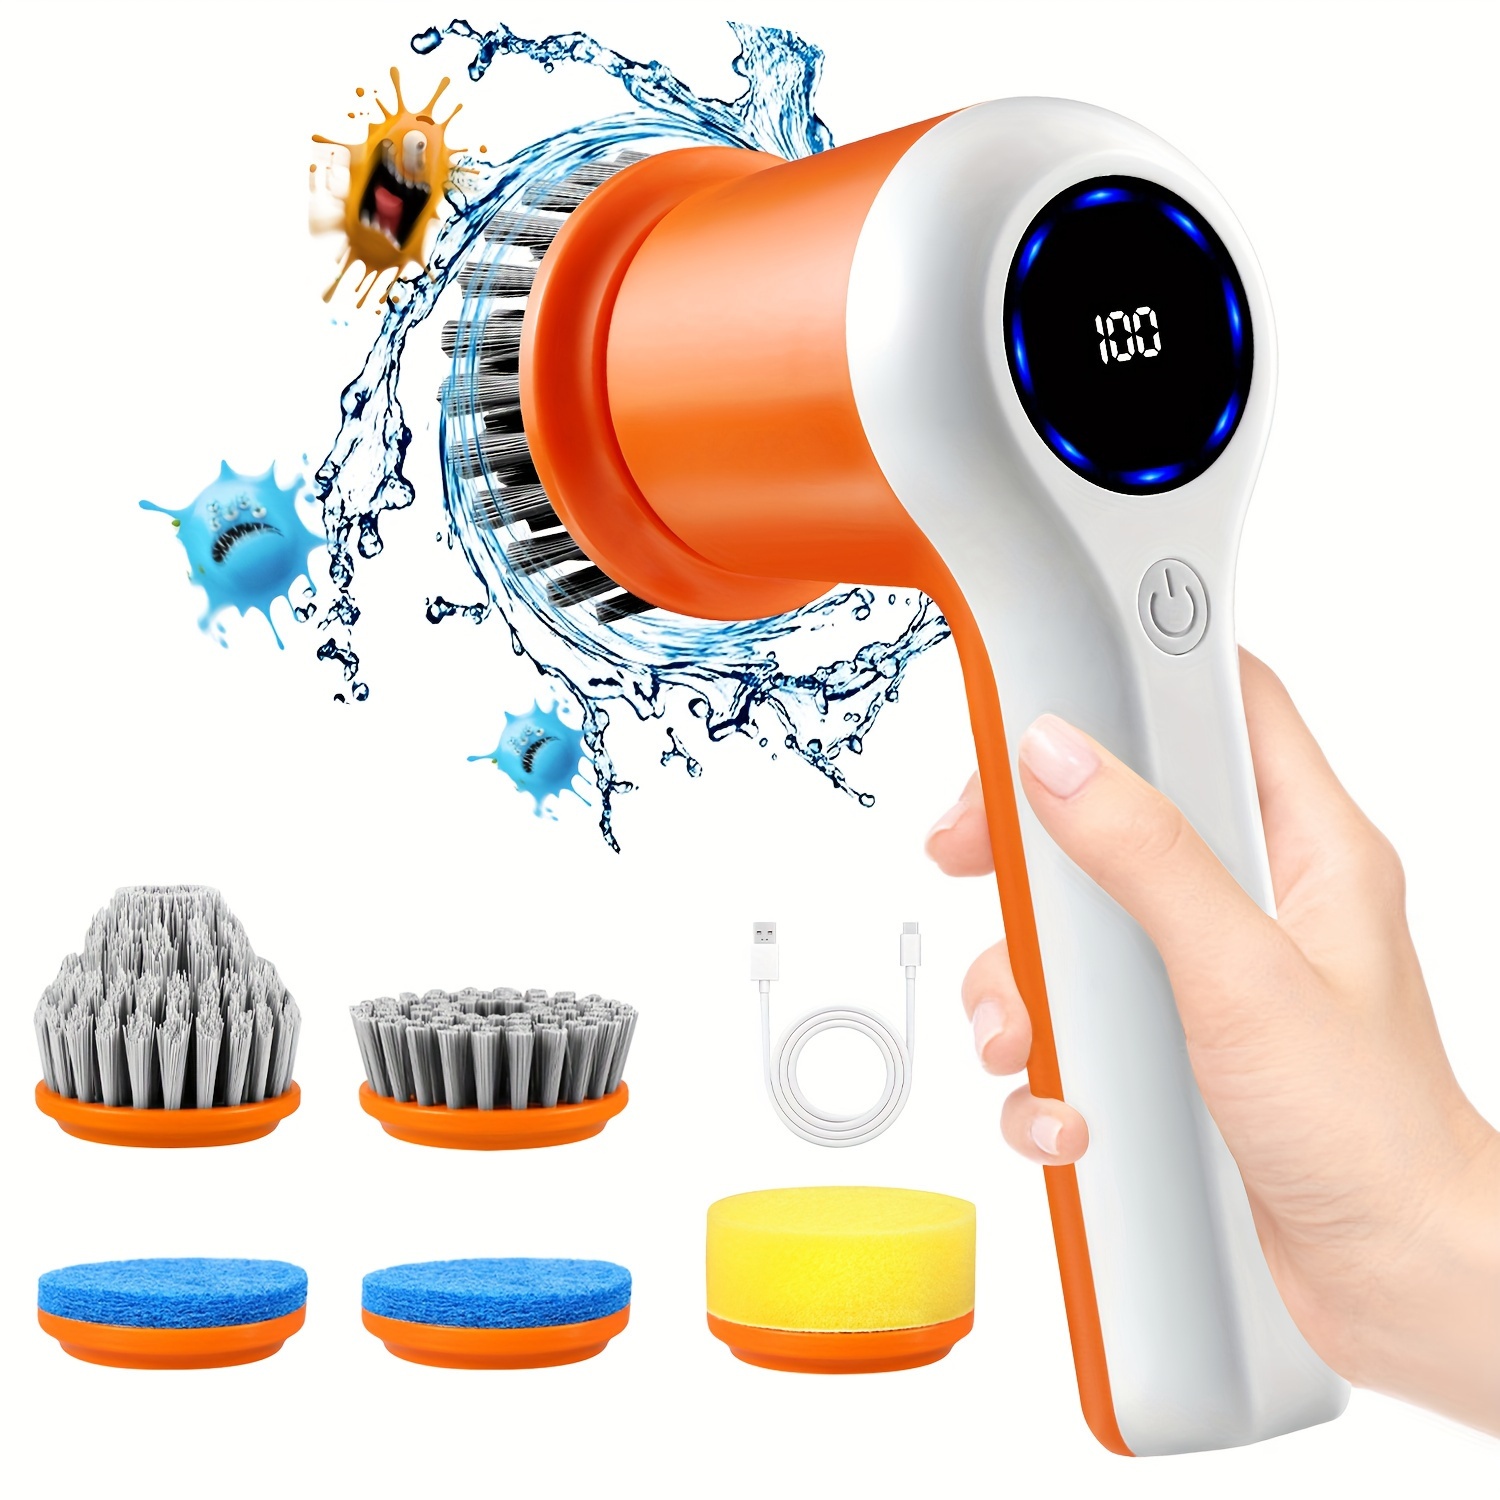 

1 Set, Electric Spin Scrubber, Rechargeable Bathroom Scrubber With Display And 5 Replaceable Brush Heads, 2 Speeds Cordless Cleaning Brush Scrubber For Bathtub, Tub, Tile, Floor